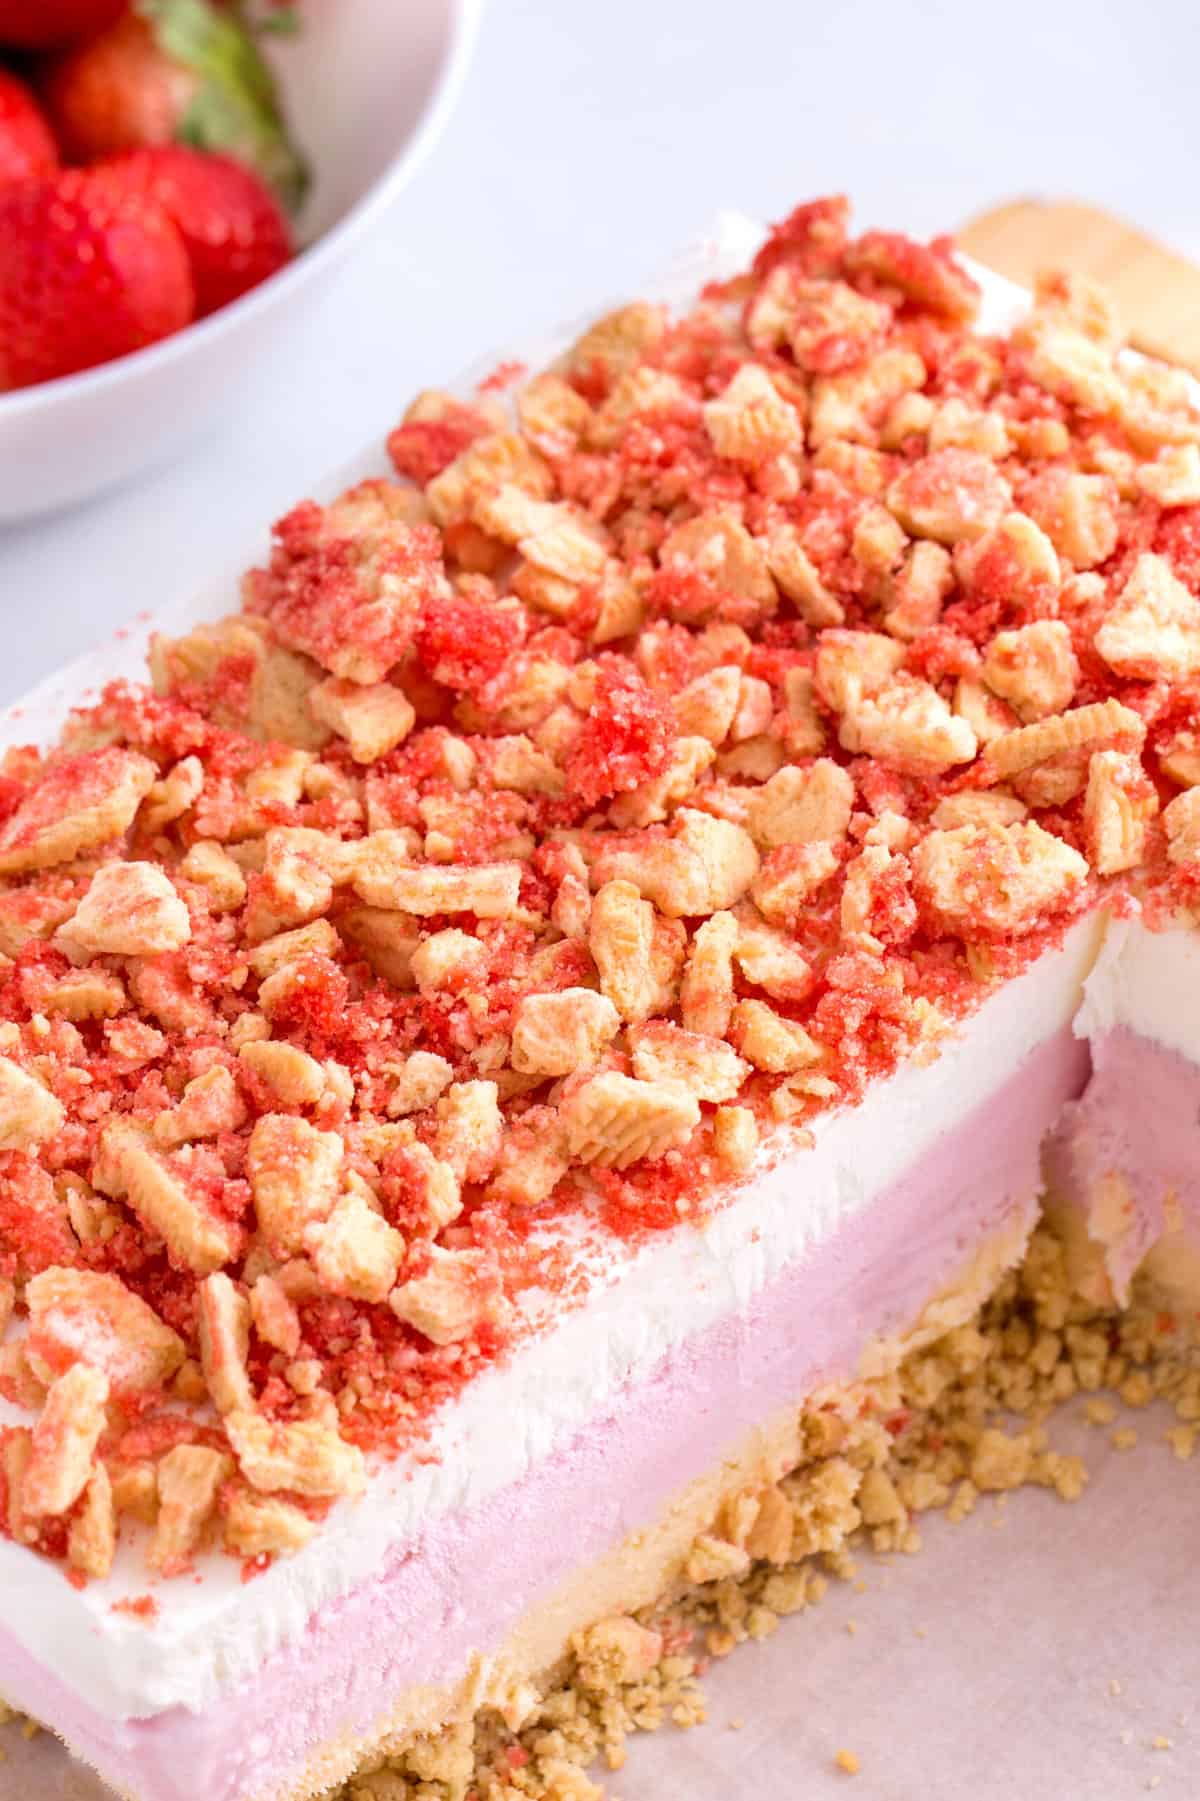 strawberry crunch ice cream cake cut into to show the cross section and all the ice cream and crunch layers